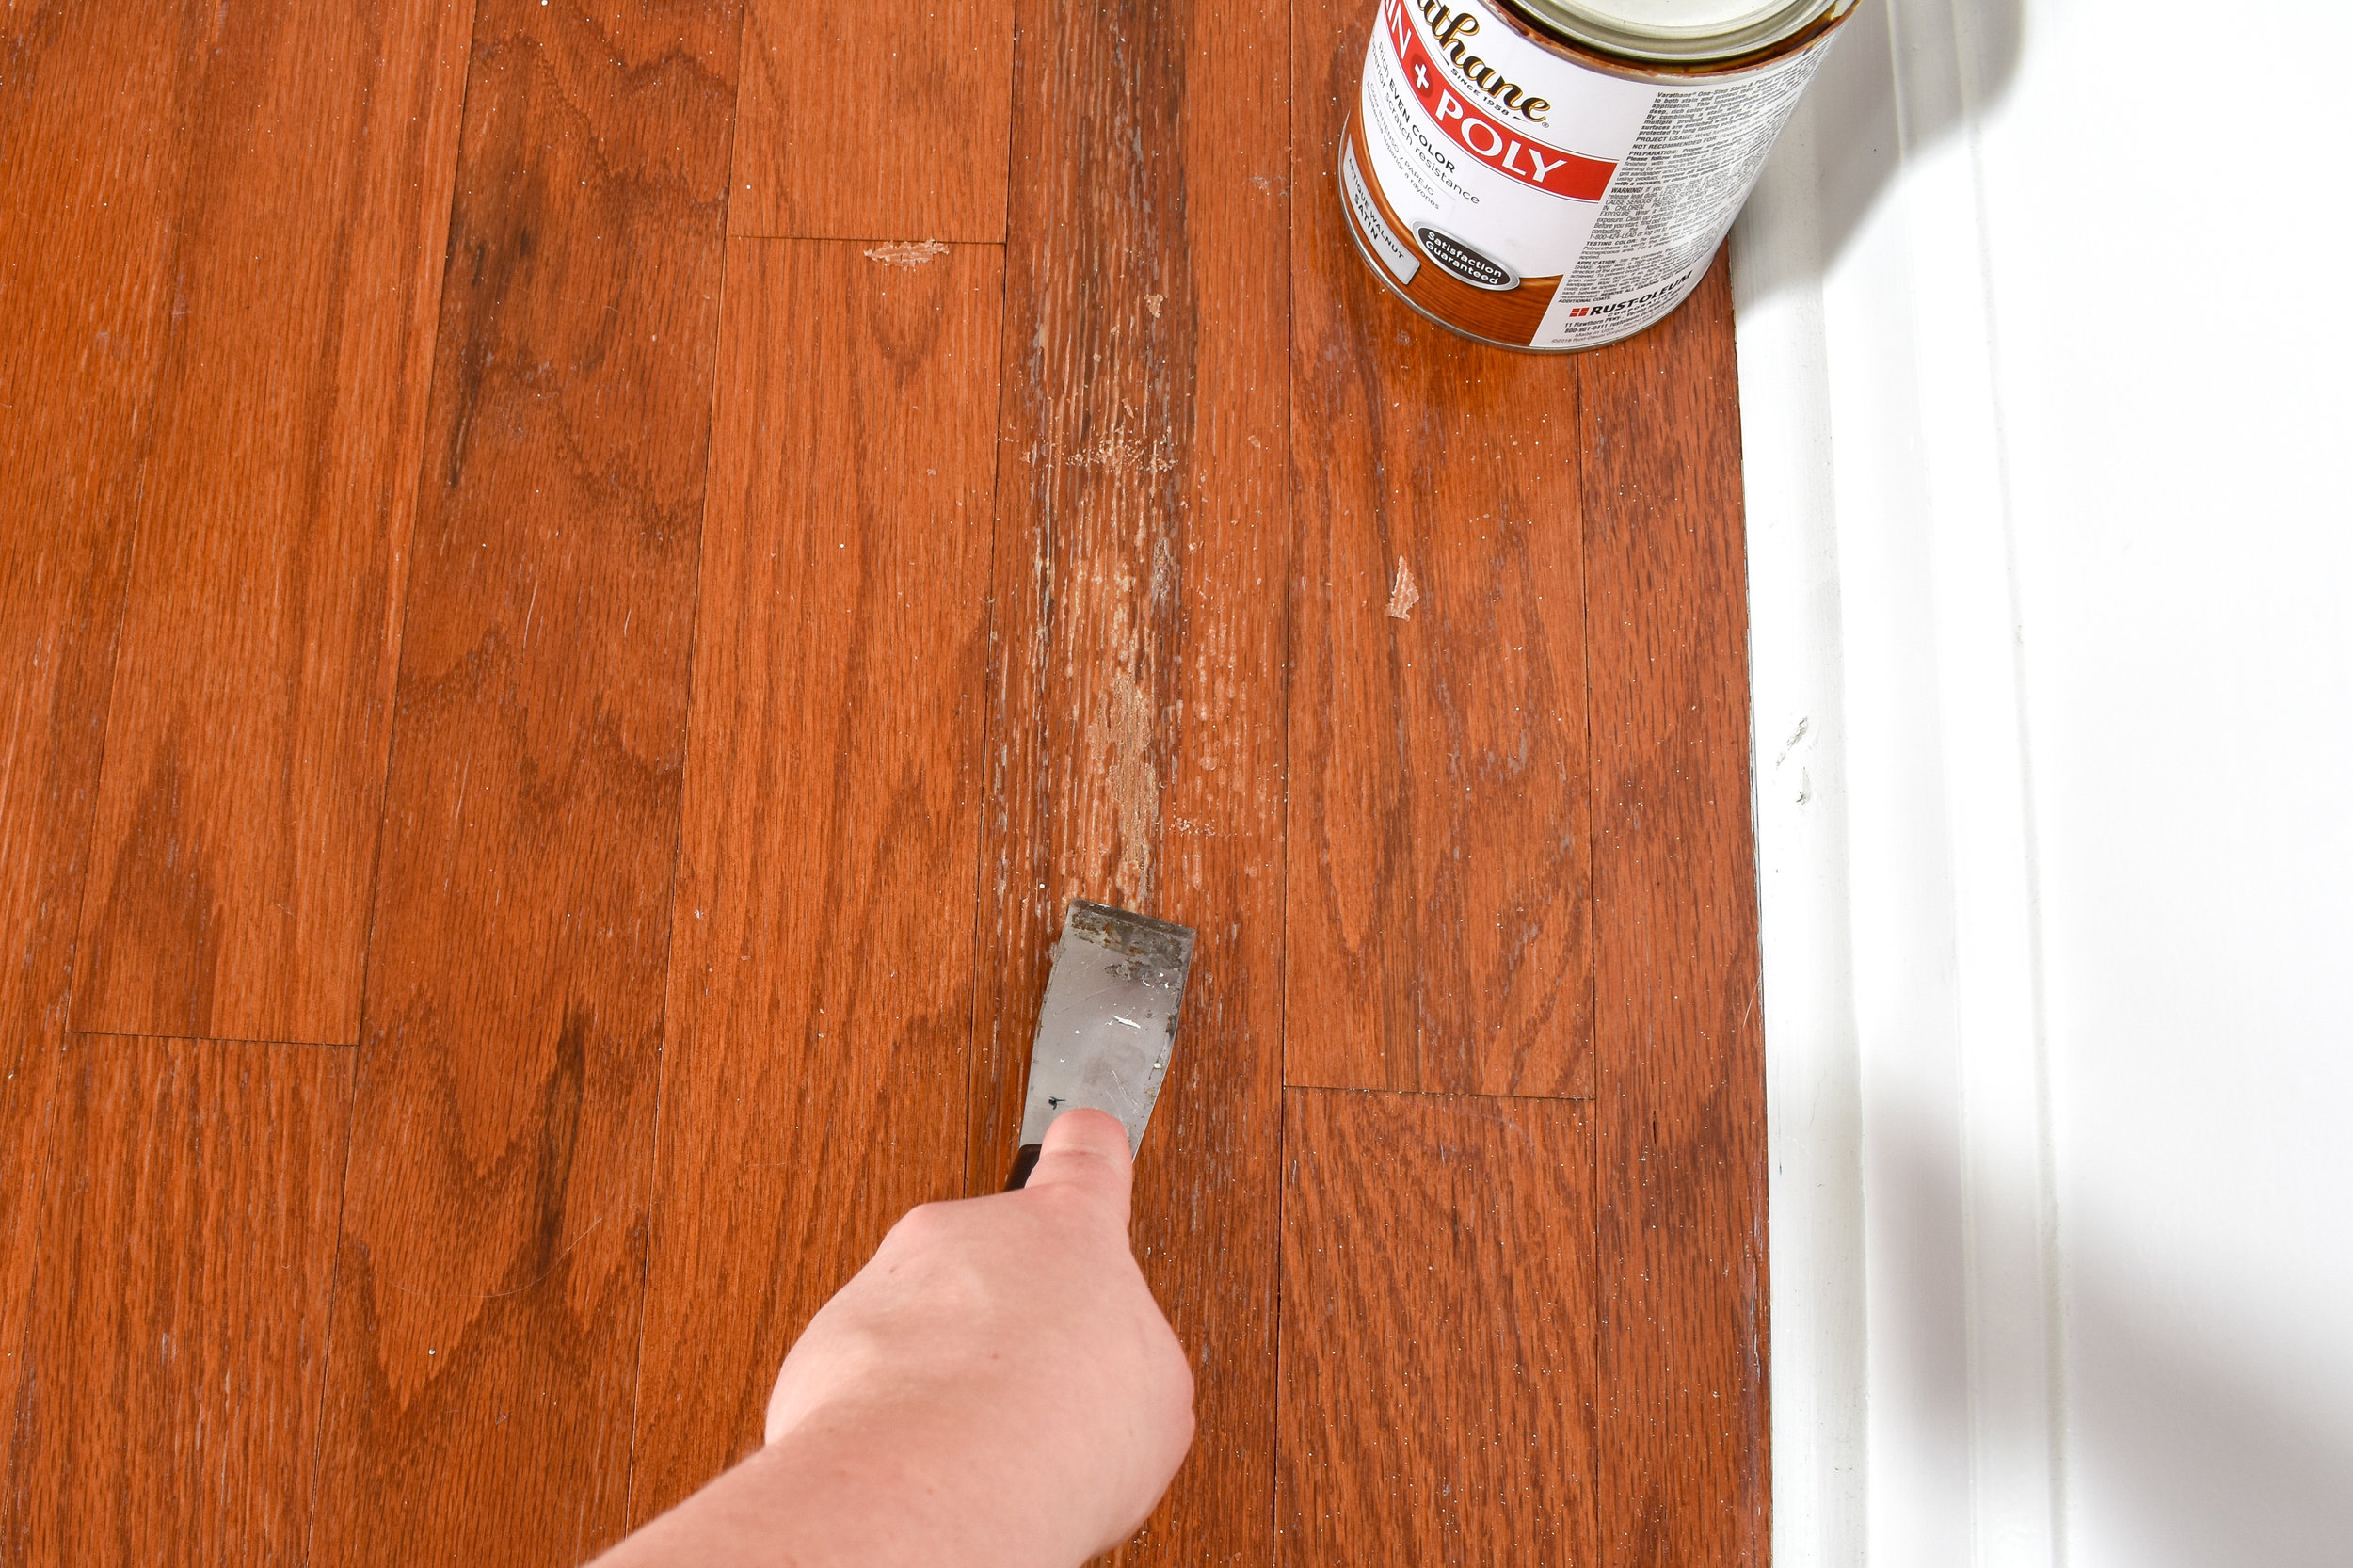 Repairing water damage to prefinished hardwood flooring - how to know if the damage is surface damage or actual wood rot. #hardwoodfloors #flooringmaintenance #flooringrepair